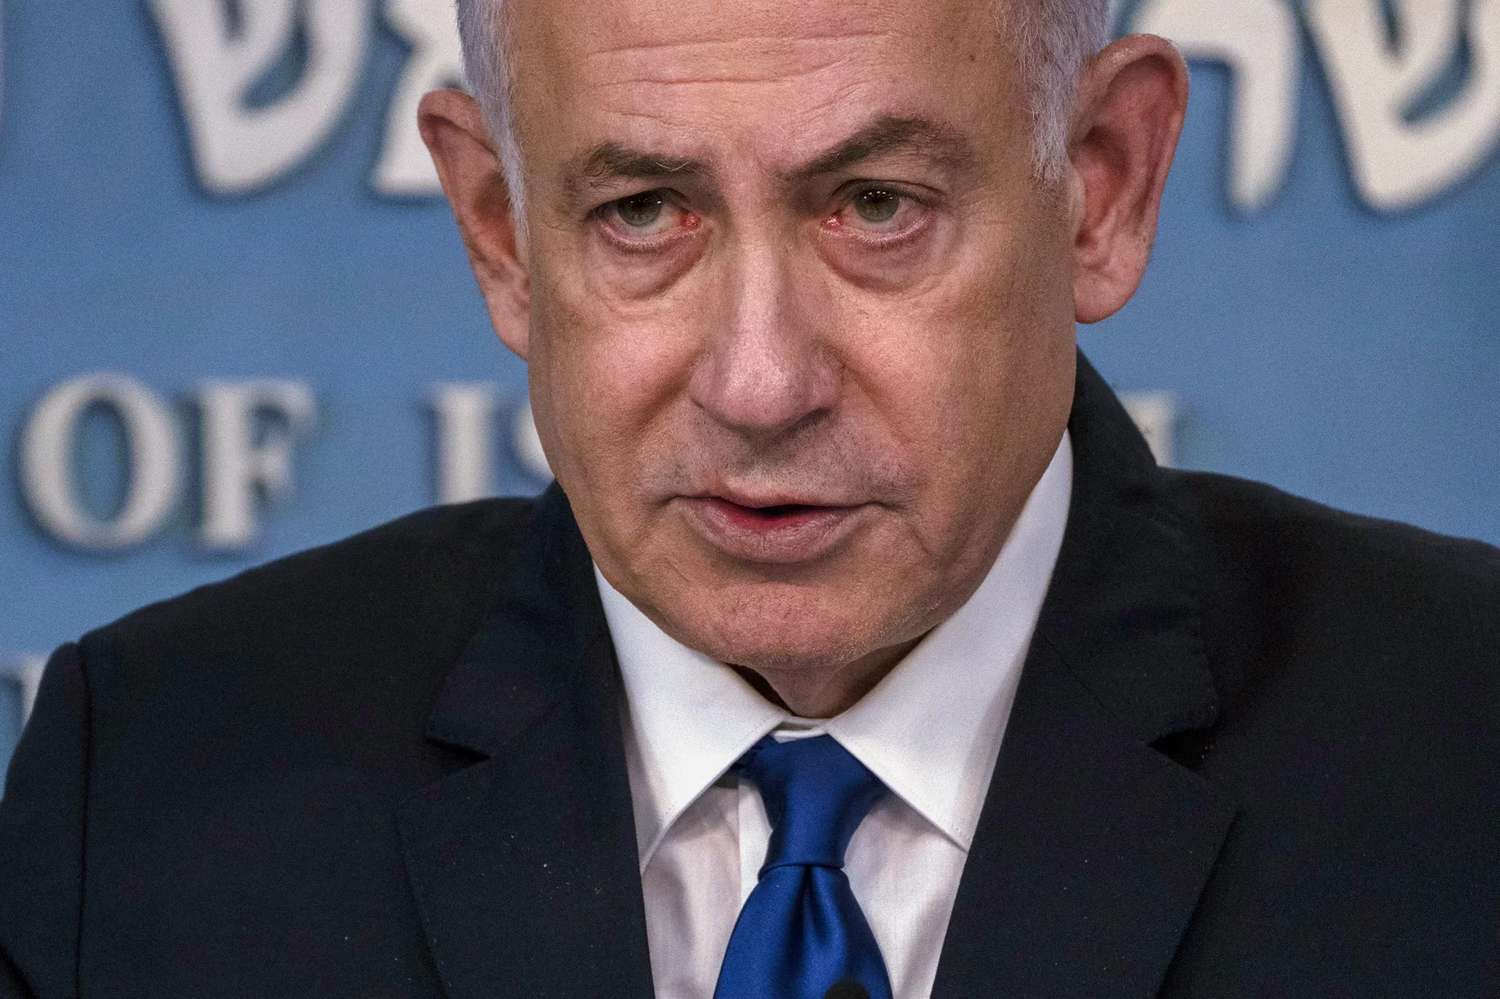 Israeli Prime Minister Benjamin Netanyahu said Tuesday that Israel will enter Rafah, the city in southern Gaza where more than a million displaced Palestinians have taken shelter, "with or without a deal" to free the remaining hostages.